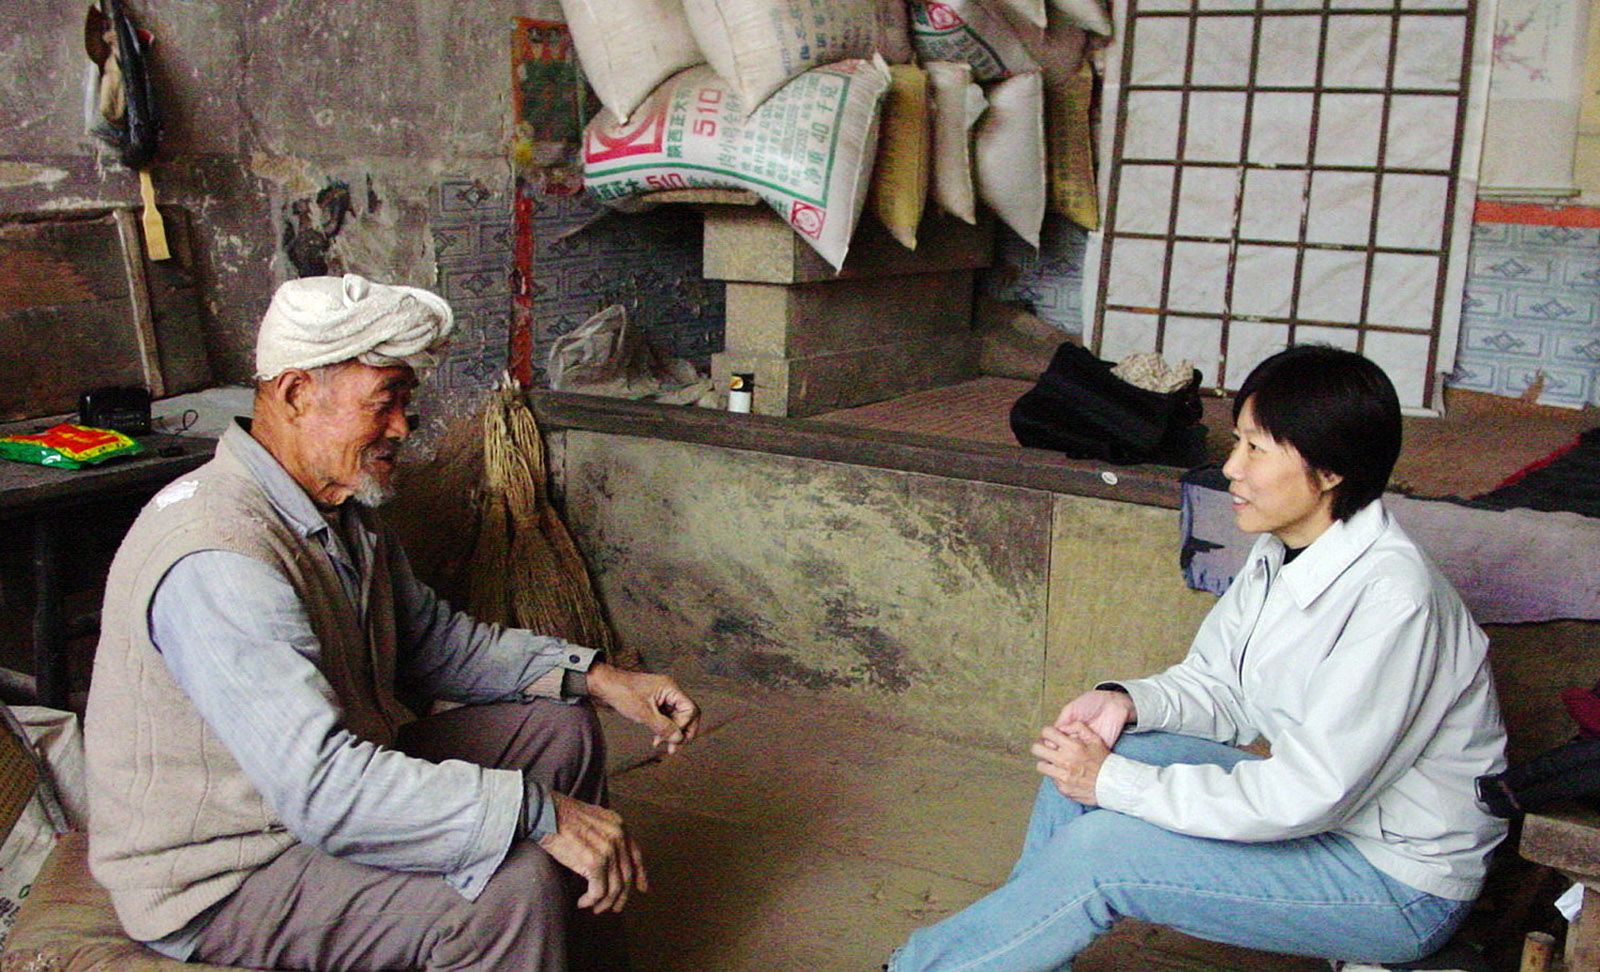 A villager from Ji, northern Shaanxi, China, speaking with Guo Yuhua, 2005. Image from Guo Yuhua. China, 2005.